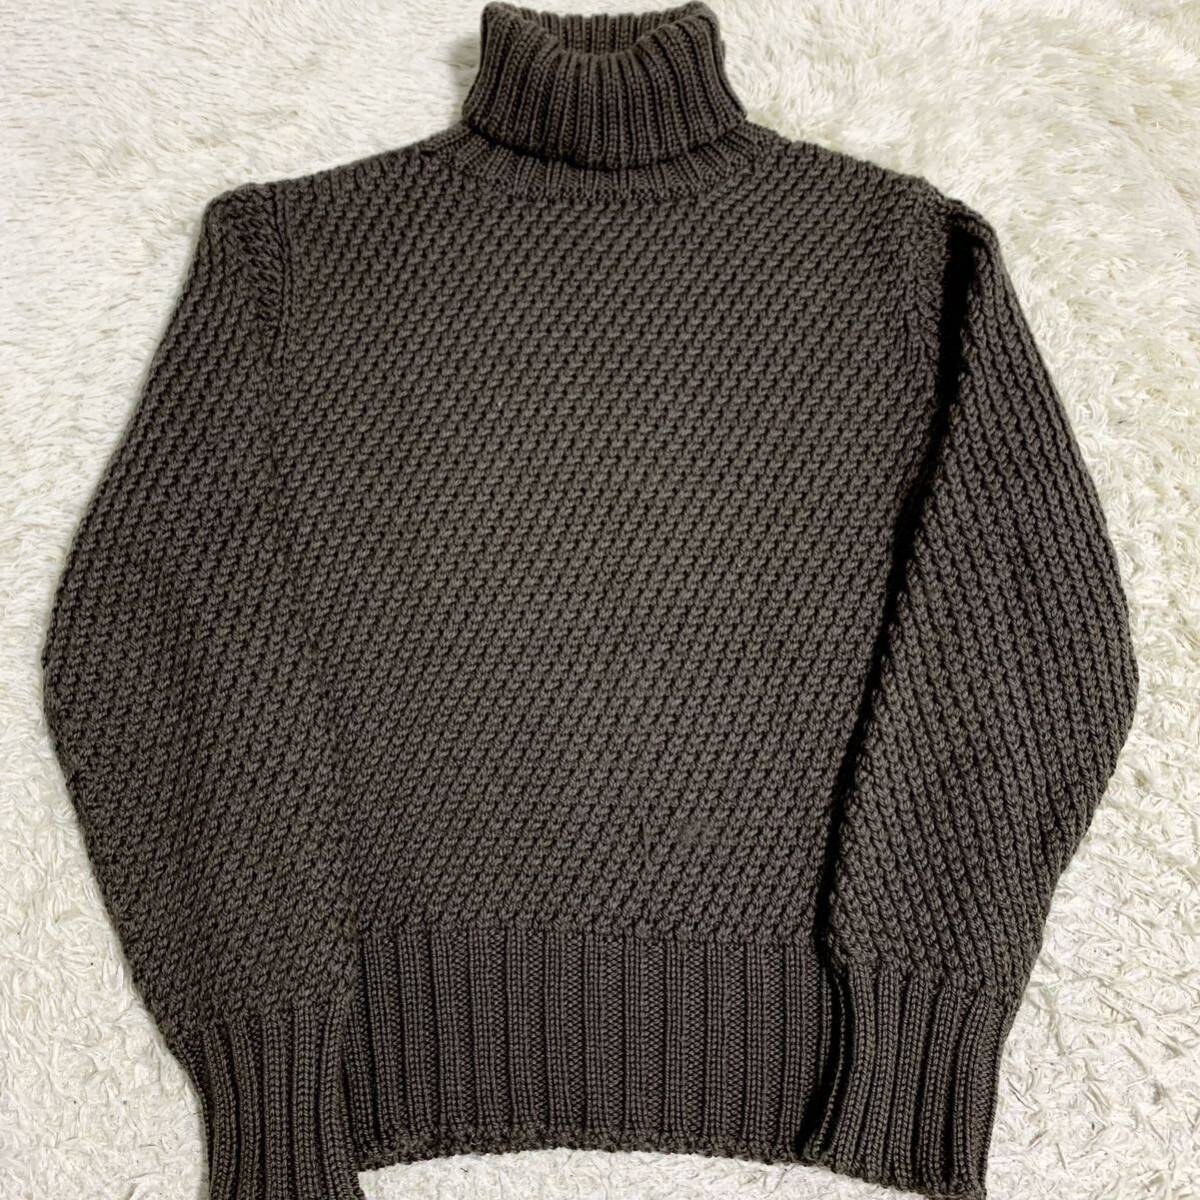  ultimate beautiful goods Gucci [ popular design ] GUCCI sweater knitted tops high‐necked wool men's khaki size M